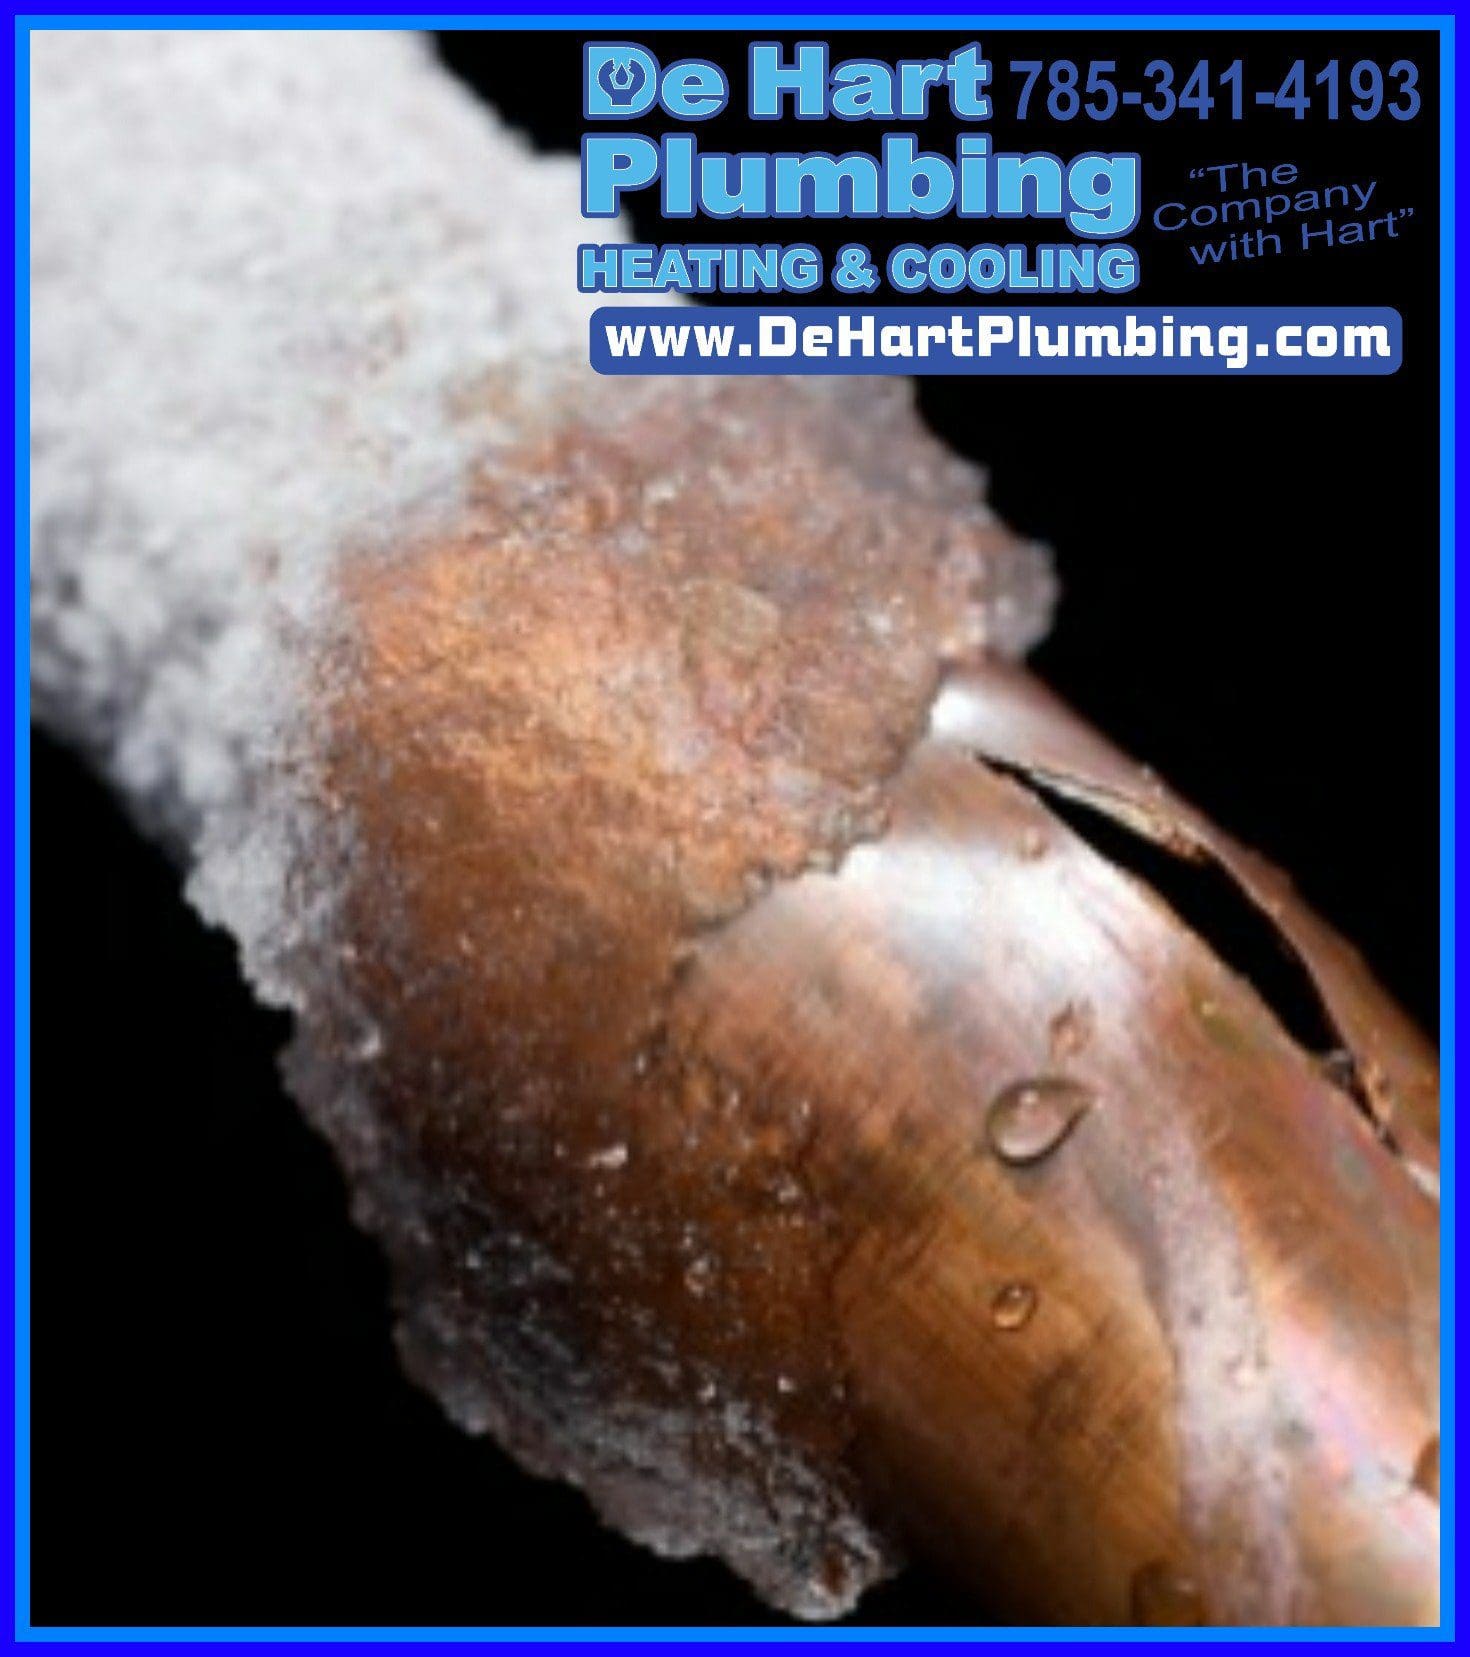 Preventing Frozen Water Lines should my outside ac unit blow hot air water softener tax credit hvac services kansas air conditioner blowing hot air inside and cold air outside standard plumbing near me sink gurgles when ac is turned on government regulations on air conditioners manhattan ks water m and b heating and air manhattan kansas water bill furnace flame sensors can an ac unit leak carbon monoxide why does my ac keep blowing hot air furnace issues in extreme cold seer rating ac vip exchanger can you bypass a flame sensor my furnace won't stay on ac unit in basement leaking water faucet repair kansas city clean furnace ignitor r22 refrigerant laws can you buy r22 without a license manhattan remodeling new refrigerant regulations ac unit not blowing hot air central air unit blowing warm air bathroom remodeling services kansas city ks pilot light is on but furnace won't start bathroom restore why furnace won't stay lit k s services sewer line repair kansas city air conditioner warm air how to check the pilot light on a furnace manhattan ks pollen count cleaning igniter on gas furnace central air unit won't turn on why my furnace won't stay lit why won't my furnace stay on ac is just blowing air why is ac not turning on can t find pilot light on furnace how much for a new ac unit installed plumbing and heating logo r 22 refrigerant for sale air conditioner leaking water in basement ac unit leaking water in basement air manhattan where to buy flame sensor for furnace outdoor ac unit not blowing hot air drain tiles for yard furnace won't stay ignited ac plunger not working what if your ac is blowing hot air how to bypass flame sensor on furnace can i buy refrigerant for my ac what is a furnace flame sensor is r22 a cfc goodman ac unit maintenance how to light your furnace why is my ac not blowing hot air a better plumber heating and cooling home ac cools then blows warm gas not lighting on furnace how to fix carbon monoxide leak in furnace what are those tiny particles floating in the air standard thermostat ks standard ac service free estimate r22 drop-in replacement 2022 safelite manhattan ks goodman ac repair how to check for cracked heat exchanger heater not lighting energy efficient air conditioner tax credit 2020 why won t my furnace stay lit how does drain tile work bathroom remodel kansas vip air duct cleaning is a new air conditioner tax deductible 2020 how to bypass a flame sensor on a furnace ac blowing hot air instead of cold how to clean flame sensor in furnace 14 seer phase out my hvac is not blowing hot air how to check a pilot light on a furnace my ac is blowing warm air kansas gas manhattan ks my ac is not blowing hot air my gas furnace won't stay on gas furnace wont ignite bathroom remodel and plumbing ac system install goodman heating and air conditioning reviews how to find pilot light on furnace water heater repair kansas furnace will not stay running ac on but blowing warm air what does sump pump do what causes a heat exchanger to crack pilot is lit but furnace won t turn on do they still make r22 ac units problems with american standard air conditioners new flame sensor still not working cleaning services manhattan ks gas furnace won't ignite self igniting furnace won't stay lit ac blowing warm water heater installation kansas city cleaning a flame sensor can you clean a furnace ignitor air conditioning blowing warm air second ac unit for upstairs furnace flame won t stay lit carbon monoxide furnace leak ac sometimes blows warm air auto pilot light not working how to clean a dirty flame sensor k and s heating and air 1st american plumbing heating & air what does the flame sensor do on a furnace cleaning furnace burners all year plumbing heating and air conditioning how much is a new plumbing system pilot light furnace location manhattan kansas water ac leaking water in basement ac running but blowing warm air super plumbers heating and air conditioning furnace doesn't stay lit new epa refrigerant regulations 2023 sila heating air conditioning & plumbing ac started blowing warm air air conditioner blowing hot air instead of cold gas furnace pilot light out how to clean the sensor on a furnace when did they stop making r22 ac units furnace flame sensor cleaning a flame sensor on a furnace ac putting out hot air why won't my furnace stay lit goodman air conditioning repair how long does a furnace ignitor last sump pump repair kansas city my ac is blowing out warm air how to clean a flame sensor on a furnace how to clean furnace ignitor sensor commercial hvac kansas greensky credit union ac is not blowing hot air no flame in furnace what is an r22 ac unit heater won t stay lit bolts plumbing and heating furnace sensor replacement home heater flame sensor realize plumbing how to replace flame sensor on furnace american air specialists manhattan ks water bill hot air coming from ac how to get ac ready for summer ac warm air job openings manhattan ks ductless air conditioning installation manhattan house ac blowing warm air gas heater won t light ac blowing hot air in house pilot light on furnace won t light astar plumbing heating & air conditioning standard air furnace flame sensor where to buy heater won't light electric furnace pilot light what is seer on ac seer recommendations pha.com flame sensor rod check furnace pilot light cleaning flame sensor on furnace furnace won t stay running true home heating and air conditioning furnace repair star city how to clean furnace ignition sensor how to light a furnace how long does a furnace flame sensor last my furnace won t stay lit ac wont cut on when your air conditioner is blowing hot air central ac only blowing warm air why won t my furnace stay on jobs near manhattan ks filter delivery 24/7 ducts care bbb electric pilot light not working hot air coming out of ac cleaning the flame sensor on a furnace hvac blowing warm air on cool does a cracked heat exchanger leak carbon monoxide if ac is blowing warm air hvac blowing warm air mitsubishi mini split gurgling sound friendly plumber heating and air do they still make r22 freon manhattan gas company find pilot light on furnace ac is blowing warm air sewer line repair kansas r22 central air unit r22 clean flame sensor where is the flame sensor on a furnace pilot light on but furnace not working standard heating and air conditioning gas heater pilot light troubleshooting natural gas furnace won't stay lit goodman air conditioning and heating gas furnace will not ignite my house ac is blowing warm air ac unit blowing warm air inside standard heating and air minneapolis contractors manhattan ks plumbing heating and air when did r22 phase out individual room temperature control system ac slab does electric furnace have pilot light standard plumbing st george is a new hot water heater tax deductible 2020 fall furnace tune up how does a flame rod work appliances manhattan ks flame sensor cleaner furnace pilot lit but won't turn on how does filtrete smart filter work plumbing free estimate air wont kick on lake house plumbing heating & cooling inc what does flame sensor look like hvac repair manhattan seer 13 manhattan ks reviews heating and air free estimates plumbers emporia ks can a broken furnace cause carbon monoxide apartment ac blowing hot air 2nd floor air conditioner air condition wont turn on what to do if ac is blowing hot air manhattan air conditioner installation ac just blowing hot air how to light a gas furnace with electronic ignition how to get your furnace ready for winter dry cleaners in manhattan ks standard heating and cooling mn ac coming out hot furnace ignitor won't turn on what to do when ac blows warm air gas heater pilot light won't light is 14 seer going away furnace dirty flame sensor ac not working blowing hot air flame no call for heat flame sensor location on furnace air conditioner blowing warm air staley plumbing and heating ac repair kansas city ks bathroom tune up bathroom renovation kansas heat sensor furnace united standard water softener furnace pilot light won t light ac duct cleaning kansas city manhattan plumbing and heating electric igniter on furnace not working heater pilot light out warm ac furnace flame call standard plumbing bathroom plumbing remodel furnace burners won't stay lit a-star air conditioning and plumbing big pha hvac installation kansas r22 refrigerant ac unit onecall plumbing heating & ac manhattan sewer system furnace leaking carbon monoxide leak detection kansas city hotel rooms manhattan ks how to find the pilot light on a furnace standard air conditioning temperature in junction city kansas bills heating and cooling reviews goodmans air conditioners wake sewer and drain cleaning service how to bypass flame sensor flame sensor in furnace clark air services junction city plumbers how to test a furnace ignitor why is hot air coming out of ac furnace ignitor sensor cracked heat exchanger carbon monoxide boiler repair kansas cleaning furnace ignitor home heating history and plumbing and heating warm air coming from ac why won't my pipe stay lit can't find pilot light on furnace pedestal sump pump parts ignitor sensor furnace heat repair service how to fix frozen air conditioner best way to clean flame sensor standard heating and cooling plumbing heating the standard reviews furnace pilot wont light gas not getting to furnace 24/7 ducts cares reviews k's discount r22 discontinued fix all plumbing lowest seer rating allowed free estimate plumber water softeners kansas heater flame sensor my furnace wont ignite federal tax credit for high efficiency furnace can you pour hot water on a frozen ac unit electric furnace won't come on furnace won t light manhattan sewer inside ac unit won't turn on furnace doesn t stay lit hvac junction city ks field drain tile installation ac not blowing hot air goodman air conditioner repair pollen count manhattan ks testing a furnace ignitor why is my ac blowing warm air furnace pilot light won't light warm air coming out of ac cleaning flame sensor ac repair in kansas city furnace won't ignite pilot standard plumbing and heating canton ohio flynn heating and air conditioning kansas gas service manhattan kansas shower remodel kansas air vent cleaning kansas city gas furnace won t stay lit electric pilot light won't light sump pump installation kansas replace flame sensor on furnace r22 refrigerant discontinued standard heating & air conditioning company pha com current temperature in manhattan kansas furnace won't stay running air conditioning services kansas manhattan plumbing bathroom remodel plumbing gas heater will not stay lit what is a flame sensor on a furnace furnace temp sensor flame sensor clean heater won't stay lit plumbing payment plans r22 ac units watch repair manhattan ks furnace repair kansas ks discount why ac is not turning on goodman ac maintenance air conditioner leaking in basement how to see if pilot light is on furnace heater repair free estimate if your air conditioner blows hot air what does flame sensor do on furnace location of flame sensor on furnace ac won't turn on how to clean ignition sensor on furnace temperature in manhattan ks how to clean furnace ignitor goodman repair service near me flame sensor furnace replacement minimum seer rating by state ac pumping warm air ac blowing warm air heater repair kansas city ks maintenance pilot not staying lit on furnace how to clean my furnace flame sensor junction city to manhattan ks ac blowing out warm air heat pump leaking water in basement why does the flame keep going out on my furnace how to clean the flame sensor on a furnace when ac is blowing warm air ac blowing out hot air in house furnace wont light ac unit outside blowing hot air plumbing heating and air conditioning furnace sensors hood plumbing manhattan ks furnace will not light new furnace and ac tax credit hvac flame sensor flame not staying lit on furnace work from home jobs manhattan ks why does ac blow warm air a c seer rating how to clean a flame sensor on a gas furnace home ac blowing warm air seer ratings ac electric water heater installation kansas city can a dirty filter cause ac to blow warm air why is my air conditioner not blowing hot air where can i buy a flame sensor for my furnace where to buy flame sensor near me ac only blowing warm air how to light furnace furnace plugged into outlet tax deduction for new furnace plumbing classes nyc flame sensor cleaning checking pilot light on furnace furnace not lighting air quality in manhattan clean flame sensor still not working gas furnace does not ignite flame sensor for furnace mini split gurgling sound k & s plumbing services how to check a flame sensor on a furnace how do you light a furnace should outside ac unit blow cool air water leaking from ac unit in basement goodman ac service near me hvac tax credit 2020 how to check if your furnace is working furnace heat sensor replacement goodman heating and air conditioning pilot light on furnace went out bills plumbing near me bathroom remodelers kansas city ks heat pump repair kansas city hvac unit blowing warm air shortsleeves air conditioner does not turn on ac condenser blowing hot air air conditioner just blowing air ac company kansas gas furnace won't light how to clean a furnace ignitor appliance repair manhattan ks dry cleaners manhattan ks can see the air coming out of ac dirty flame sensor gas furnace mitsubishi mini split clogged drain how to check furnace flame sensor sump pump repair kansas routine plumbing maintenance bathroom remodel manhattan where is the pilot light on a furnace mini-split ac kansas airteam heating and cooling how to clean sensor on furnace ductless mini splits tonganoxie ks vip sewer and drain services gas furnace heat sensor b glowing reviews how to ignite furnace furnace sensor cleaning leak detection kansas bathroom remodeling kansas heating and air conditioning replacement bypassing flame sensor gas manhattan ks ac blowing heat air quality testing kansas manhattan air conditioning company how to fix a broken air conditioner furnace takes a long time to ignite bypass flame sensor where is the flame sensor goodman kansas furnace ignition sensor furnace won t ignite air conditioner blowing warm goodman heating and plumbing furnace flame sensor testing furnace won t turn on after summer we stay lit flame sensor on furnace gas furnace flame sensor cleaning standard heating and air coupon vent cleaning kansas city the manhattan kc how to check if the pilot light is on furnace air conditioner blowing hot air in house ac doesn't turn on drain and sewer services near me furnace flame sensor cleaning warm air blowing from ac free ac estimate when did r22 get phased out tankless water heater installation kansas energy efficient tax credit 2020 indoor air quality services gas furnace won't stay lit american standard thermostat says waiting hvac blowing hot air instead of cold furnace will not stay lit breathe easy manhattan ks how do flame sensors work tankless water heater kansas city ac making static noise testing furnace ignitor drain tile installation what does a flame sensor do standard heating & air conditioning inc air condition goodman house cleaning services manhattan ks furnace trying to ignite furnace will not stay on hvac repair kansas why is my ac blowing heat how to fix a furnace that won't ignite k's cleaning commercial hvac kansas city how to check furnace pilot light furnace doesn't stay on when ac blows warm air one call plumbing reviews flame sensor for heater furnace won't ignite heating cooling apartments in manhattan discount heating and air furnace flame not coming on furnace heater sensor clean the flame sensor seer on ac pilot light on electric furnace standard air and heating how do drain tiles work be able manhattan ks gas heater won't ignite air conditioner won't turn on furnace flame rod gas furnace not staying lit furnace won't light clean flame sensor furnace plumbing and maintenance why is my central air blowing warm air how to clean flame sensor furnace can a broken ac cause carbon monoxide air b and b manhattan ks ac is blowing warm air in house furnace flame not staying on flame sensor furnace cleaning how to check for a cracked heat exchanger flame sensor replacement ac blowing warm air house ac not turning on professional duct cleaning and home care flame sensors for furnace air conditioner repair manhattan lit standard how to clean furnace burner sila plumbing and heating air conditioner installation kansas my furnace won't stay lit outside unit not blowing hot air can you light a furnace with a lighter best drop in refrigerant for r22 central air blowing warm bathroom remodel plumber how to find flame sensor on furnace flame sensor energy star windows tax credit 2020 ac ratings pilot light furnace not working heating plumbing and air conditioning tax credit for new furnace and air conditioner 2020 furnace installation kansas flynn air conditioning emergency ac repair kansas testing a flame sensor how to clean igniter on furnace warm air blowing from a c furnace no flame water heater installation kansas pilot light on but heater not working my air conditioner is blowing warm air indoor air quality testing kansas air conditioner maintenance kansas ac unit won't turn on does hvac include plumbing air conditioner blowing out warm air drain clogs dalton air conditioning discount home filter delivery ductless ac kansas why is my ac just blowing air gas company manhattan ks done plumbing and heating reviews goodman furnace repair near me pilot won t light on furnace gas heater flame sensor standard heating and air birmingham furnace isn't lighting home works plumbing and heating air conditioner blowing warm air in house discount plumbing & heating top notch heating and cooling kansas city why is ac blowing warm air manhattan air quality pilot light won't turn on how to light gas furnace air conditioner cottonwood screen air conditioners goodman save a lot on manhattan pilot light location on furnace how often to clean furnace flame sensor tankless water heater installation kansas city dirty furnace flame sensor ks bath troubleshooting gas furnace with electronic ignition drain and sewer services goodman air conditioners cleaning furnace flame sensor manhattan ks gas furnace flame sensor rod standard bathroom remodel manhattan plumbers how to light an electric furnace home run heating and air ac free estimate does ac blow hot air my furnace won't light why is my air conditioner blowing warm air home remodeling manhattan 5 star plumbing heating and air pilot light won t light on gas furnace why is my ac warm fort riley srp phone number flynn plumbing r22 refrigerant for sale m and w heating and air emergency plumber manhattan how to check pilot light on furnace parts of a sump pump system flame sensor furnace location ignition sensor furnace central air only blowing warm air why is my ac unit blowing warm air why is the ac not turning on heater not lighting up air conditioner check electric heater pilot light drain cleaning dalton how much to have ac installed secondary ac unit air conditioner not blowing hot air standard privacy policy www standardplumbing com clark's heating and air reviews gas furnace won t light bathtub remodel kansas plumbing companies with payment plans plumbing maintenance services junction city ks to manhattan ks air conditioner repair kansas north star water softener hardness setting gas furnace wont light manhattan ks temperature furnace repair kansas city ks used r22 ac units for sale save-a-lot on manhattan discount plumbing heating & air furnace won t stay lit central air is blowing warm air gas heater won't light why won't furnace stay lit dirty flame sensor air duct cleaning kansas ignition sensor for furnace c and l heating and air drain pipe installation kansas city how to clean furnace flame sensor leaking heat exchanger furnace light not on furnace ignitor cleaning r22 cfc how to clean flame sensor on furnace refrigerant changes 2023 what is seer rating for ac asap fort riley ductwork kansas pilot light won't ignite bathroom remodeling manhattan sump pump parts near me furnace heat sensor pilot heater won't light why won't furnace ignite mitsubishi manhattan ks standard plumbing garbage disposal furnace has no flame flame sensor gas furnace temperature manhattan burner won't stay lit cracked furnace ignitor home ac blows warm air then cold air conditioner doesn't turn on furnace pilot not lighting furnace sensor how long do flame sensors last kansas gas service manhattan ks central air conditioner blowing warm air where is pilot light on furnace hot water heater kansas city why is my ac blowing out warm air furnace sensor dirty air conditioning replacement manhattan mt why does my ac blow warm air how does a furnace flame sensor work furnace burners won t stay lit do you tip hvac cleaners field tile installation ac condenser not blowing hot air high water plumbing and heating the standard manhattan heat pump kansas city plumbing heating and air conditioning near me gas furnace ignition sensor what hvac system qualifies for tax credit 2020 furnace won't stay on alternative air manhattan ks outside ac unit blowing warm air what does the flame sensor look like why is my air conditioner blowing warm reasons why furnace won't stay lit furnace flames go on and off cost of new ac unit installed how does furnace flame sensor work temp manhattan ks seer rating for ac ac seer rating furnace won't turn on after summer task ac units should outside ac unit blow hot air how to install drain tile in field kansas phcc ks meaning in plumbing where is flame sensor on furnace what does a furnace flame sensor do heat sensor for furnace hvac bangs when turning off broken flame sensor new plumbing system what does a flame sensor do on a furnace dr plumbing manhattan ks john and john plumbing duct cleaning kansas ks heating r22 ac ks heating and air pilot not lighting on furnace r22 freon discontinued clark air systems why is my ac making a weird noise marc plumbing ac cools then blows warm goodman ac service deal heating and air test furnace ignitor do plumbers work on furnaces hot air is coming from ac 24/7 ducts care reviews north star water softener reviews sump pump kansas city foundation repair manhattan ks furnace flame sensor test how does a flame sensor work flame sensor vs ignitor drain cleaning kansas pilot light out on furnace how to ignite pilot light on furnace discount plumbing heating and air gas furnace flame sensor how much is a new ac unit installed how many sump pumps do i need testing flame sensor annual plumbing maintenance duct work cleaning kansas city furnace wont stay on why my furnace won't light test flame sensor furnace water softener kansas city pilot light is on but furnace won t start how to clean furnace burners sump pump installation kansas city filter delivery service manhattan ks air quality how to fix pilot light on furnace how to clean a flame sensor furnace wont stay lit gas furnace sensor lighting a furnace ac is blowing hot air in house dirty flame sensor furnace warm air coming out of ac vents k&s heating and air reviews high efficiency gas furnace tax credit dalton plumbing heating and cooling plumbers in junction city ks sila heating and plumbing goodman air conditioning how to fix ac blowing warm air hvac payment plans k s heating and air furnace flame sensor near me how to test a flame sensor on a furnace plumbers nyc how to fix a goodman air conditioner drain and sewer repair how to light electric furnace pilot light is on but furnace won't fire up why ac not turning on stritzel heating and cooling sewer repair kansas city how to clean flame sensor on gas furnace how to fix ac blowing hot air in house how to clean the flame sensor r22 ac unit for sale heating and air plumbing ac has power but won't turn on cleaned flame sensor still not working ac unit wont turn on flame sensor location ac blow warm air outside ac unit blowing hot air manhattan ks appliance store pilot light furnace won't light dirty flame sensor on a furnace how to clean flame sensor rod what causes a cracked heat exchanger why is my hvac not blowing hot air manhattan ks to junction city ks manhattan plumber how to clean furnace sensor goodman distribution kansas city my furnace won t stay on ac unit only blowing hot air ks heating and cooling kansas city furnace replacement mini heart plumbing furnace has trouble igniting what is a flame sensor furnace won t stay on goodman ac problems standard heating reviews how to find furnace pilot light professional duct cleaners plumbing sleeves air conditioner will not turn on temp in manhattan ks seer requirements by state furnance flame sensor ac blowing warm air home manhattan ks temp positive plumbing heating and air electric pilot light furnace furnace not staying lit lit plumbing how do i fix my ac from blowing hot air ac repair manhattan ks standard heating and air clean furnace flame sensor hot water heater buy now pay later standard plumbing manhattan ks heat pump installation kansas plumbing & air star heating goodman furnace service near me flame sensor for gas furnace handyman manhattan ks k s plumbing flame ignitor furnace standard heating and plumbing furnace temperature sensor furnace won't stay lit flame sensor how to clean a furnace flame sensor standard plumbing & heating does air duct cleaning make a mess heating and air companies furnace doesn t stay on gas furnace won t stay on heating and air manhattan ks basement air conditioner leaking water flame sensor furnace ac unit blowing warm air standardplumbing ks plumbing most accurate room thermostat where is the flame sensor on my furnace plumbers manhattan ks clear air duct cleaning new drain installation save a lot manhattan 5 star air quality furnace repair nyc plumbers in manhattan ks furnace replacement kansas standard plumming what to do if your ac is blowing hot air plumber payment plan clean flame sensor with dollar bill how to clean flame sensor hvac manhattan plumbers manhattan how to tell if your furnace pilot light is out air quality junction city oregon standard manhattan plumbing system maintenance goodman plumbing and heating plumber manhattan ks standard heating & air conditioning super brothers plumbing heating & air how to fix a cracked heat exchanger plumbing and ac repair pilot light on furnace is out duct cleaning manhattan ks vip duct cleaning furnace flame sensor replacement manhattan water company furnace not staying on manhattan bathroom remodeling furnace pilot won't ignite plumber manhattan buy r22 refrigerant online air duct cleaning manhattan ks standard plumbing heating and air do i need a mini split in every room ac maintenance kansas dirty furnace burners furnace pilot light out flame sensor testing hvac manhattan ks replaced flame sensor still not working ac tune up kansas city standard bathroom furnace won't stay lit burners not lighting on furnace why is my ac blowing warm air in my house srp fort riley plumbing manhattan ks flame rod in furnace standard heating manhattan ks plumbers ks heating and plumbing temperature manhattan ks where's the pilot light on a furnace furnace flame sensor location standard plumbing and heating standard plumbing how to install drainage tile in your yard new ac installation when do you turn off heat in nyc